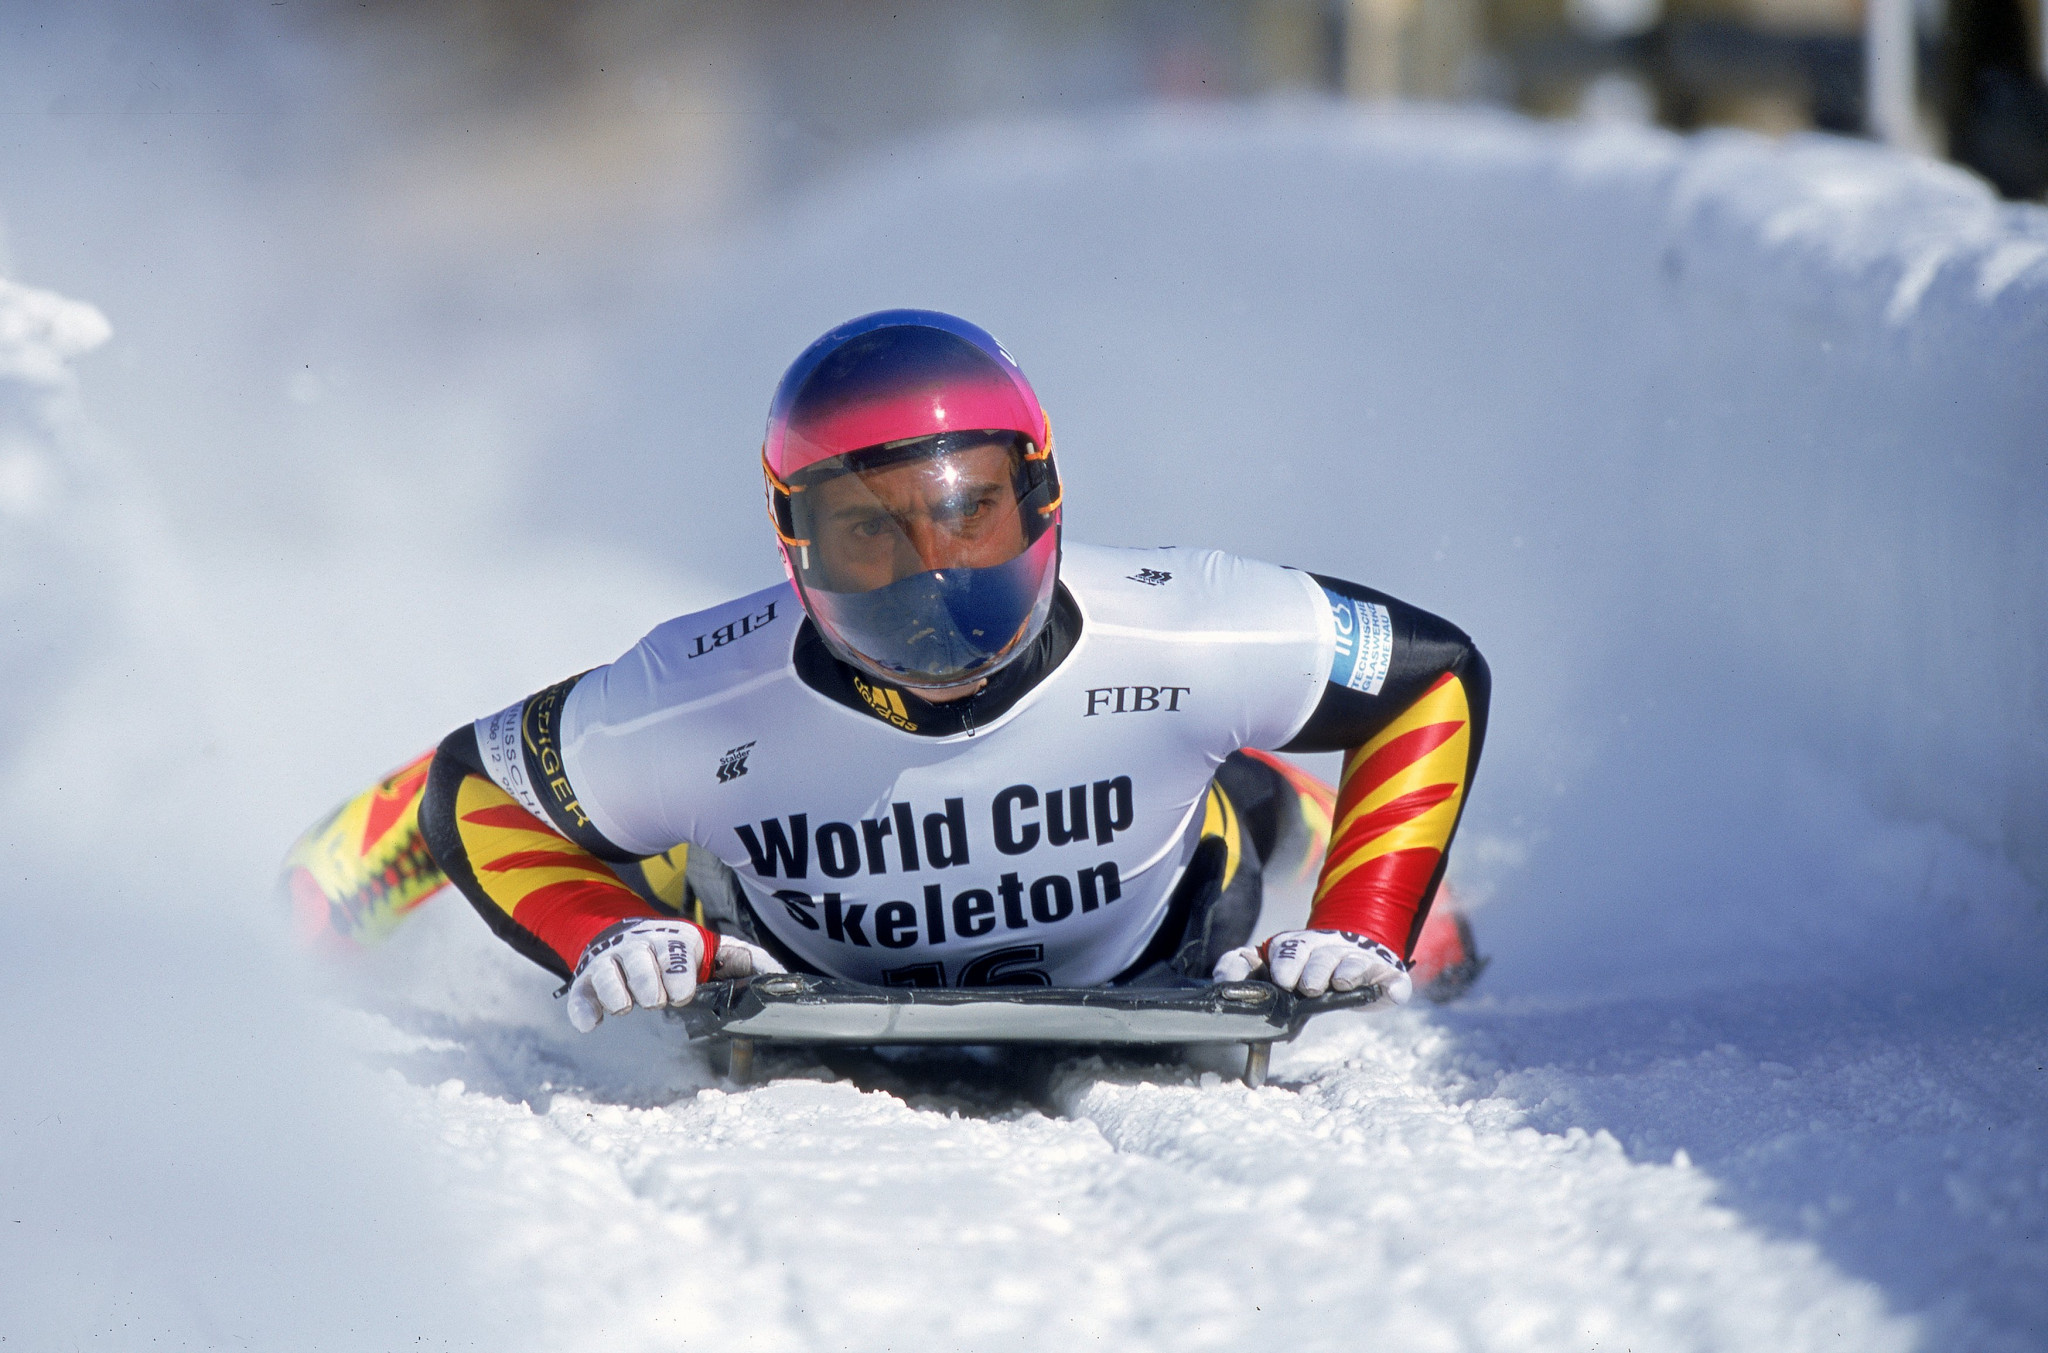 Dirk Matschenz competed for Germany before switching his allegiance to The Netherlands ©Getty Images